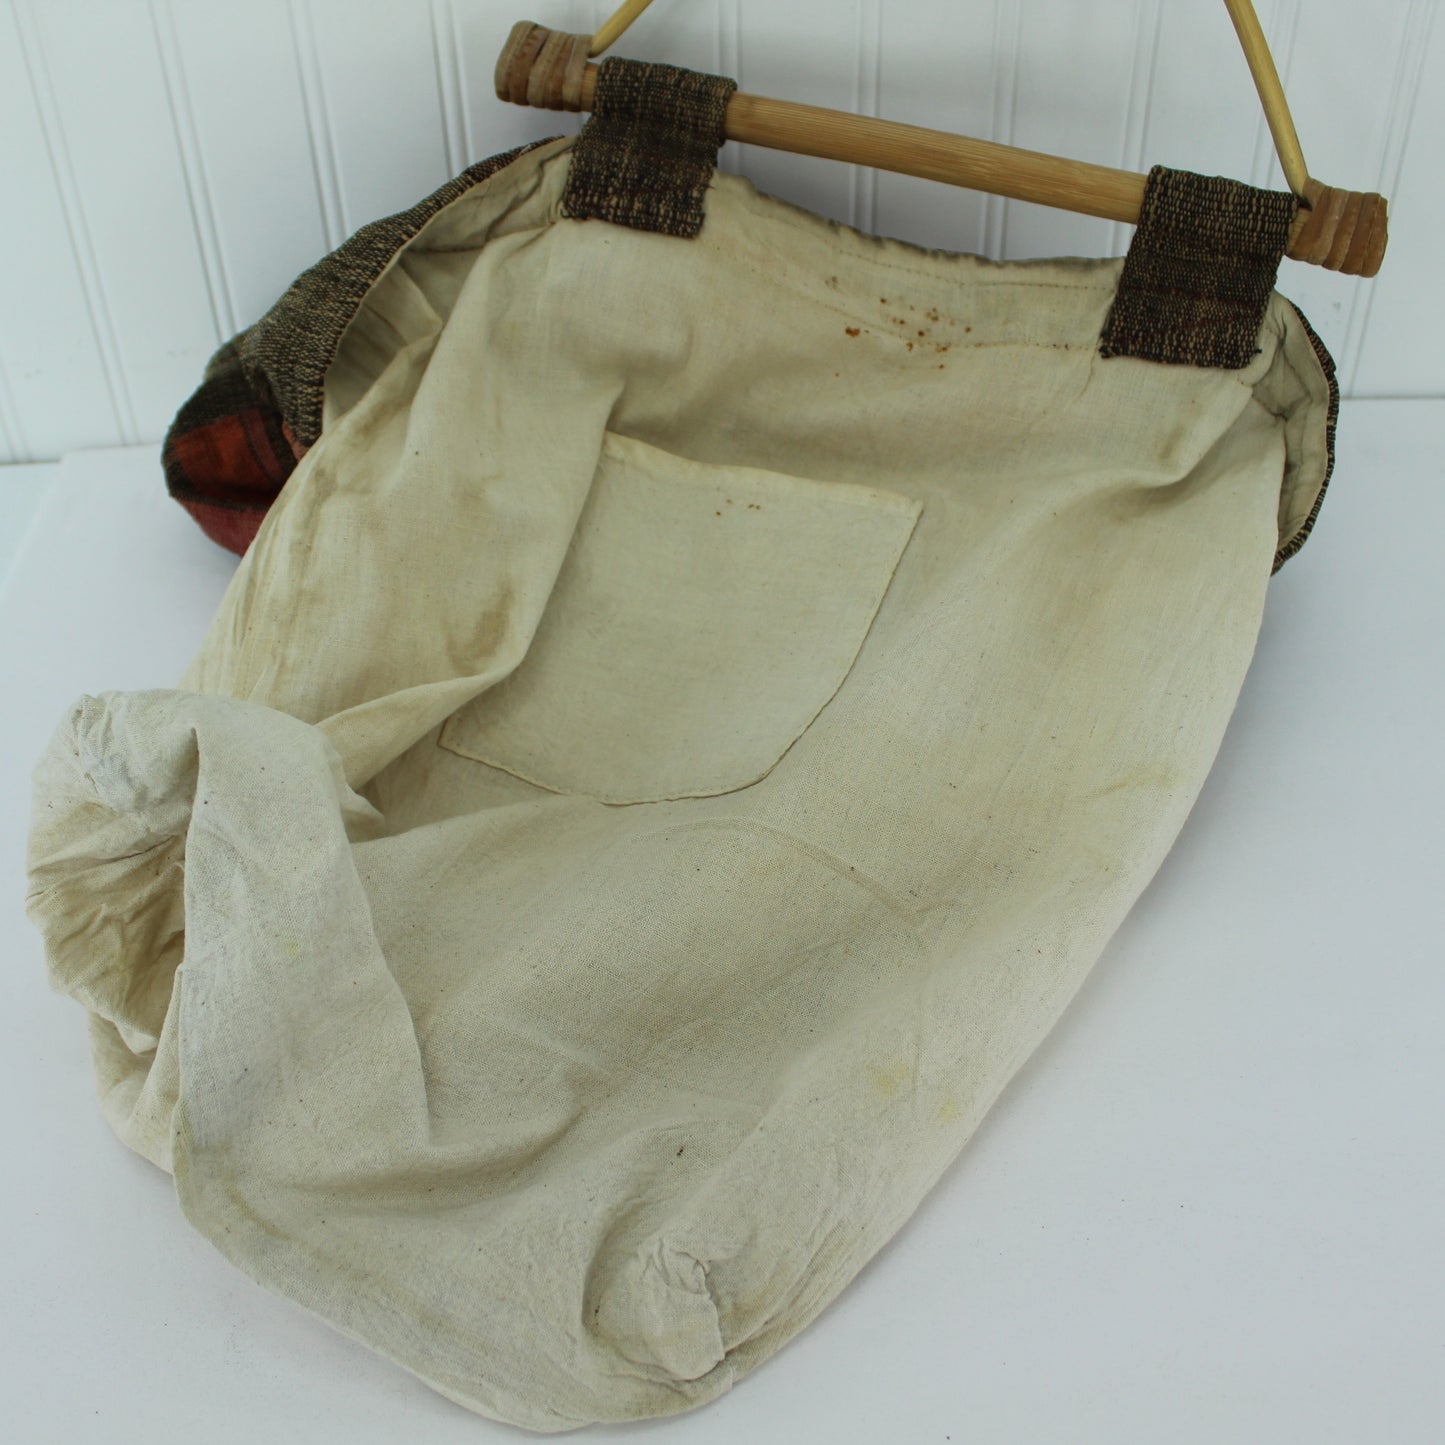 Hand Made Old Tote Granny Bag Craft Travel Bag Heavy Woven Fiber Muslin Lining Bamboo Handles orange brown hevy cotton